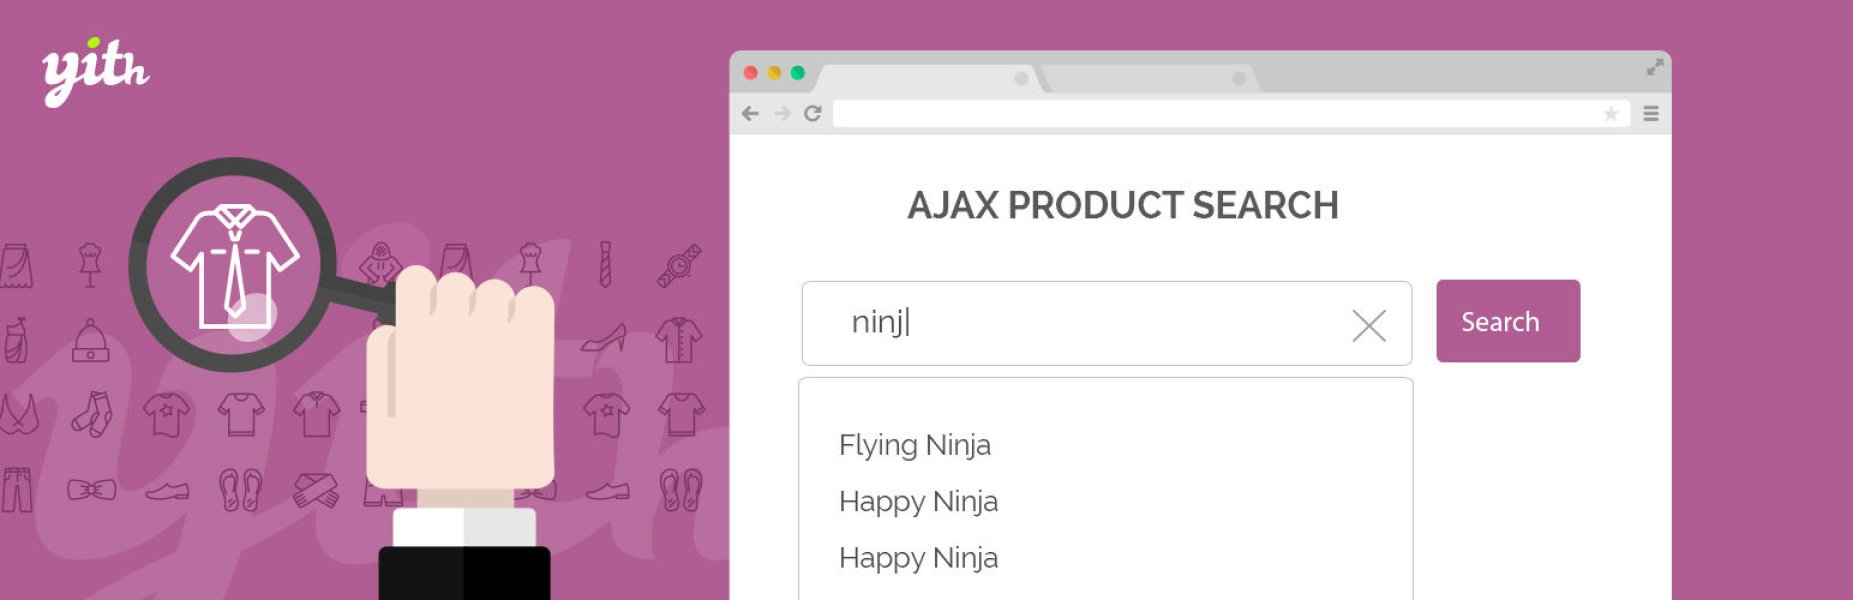 Products searching by AJAX